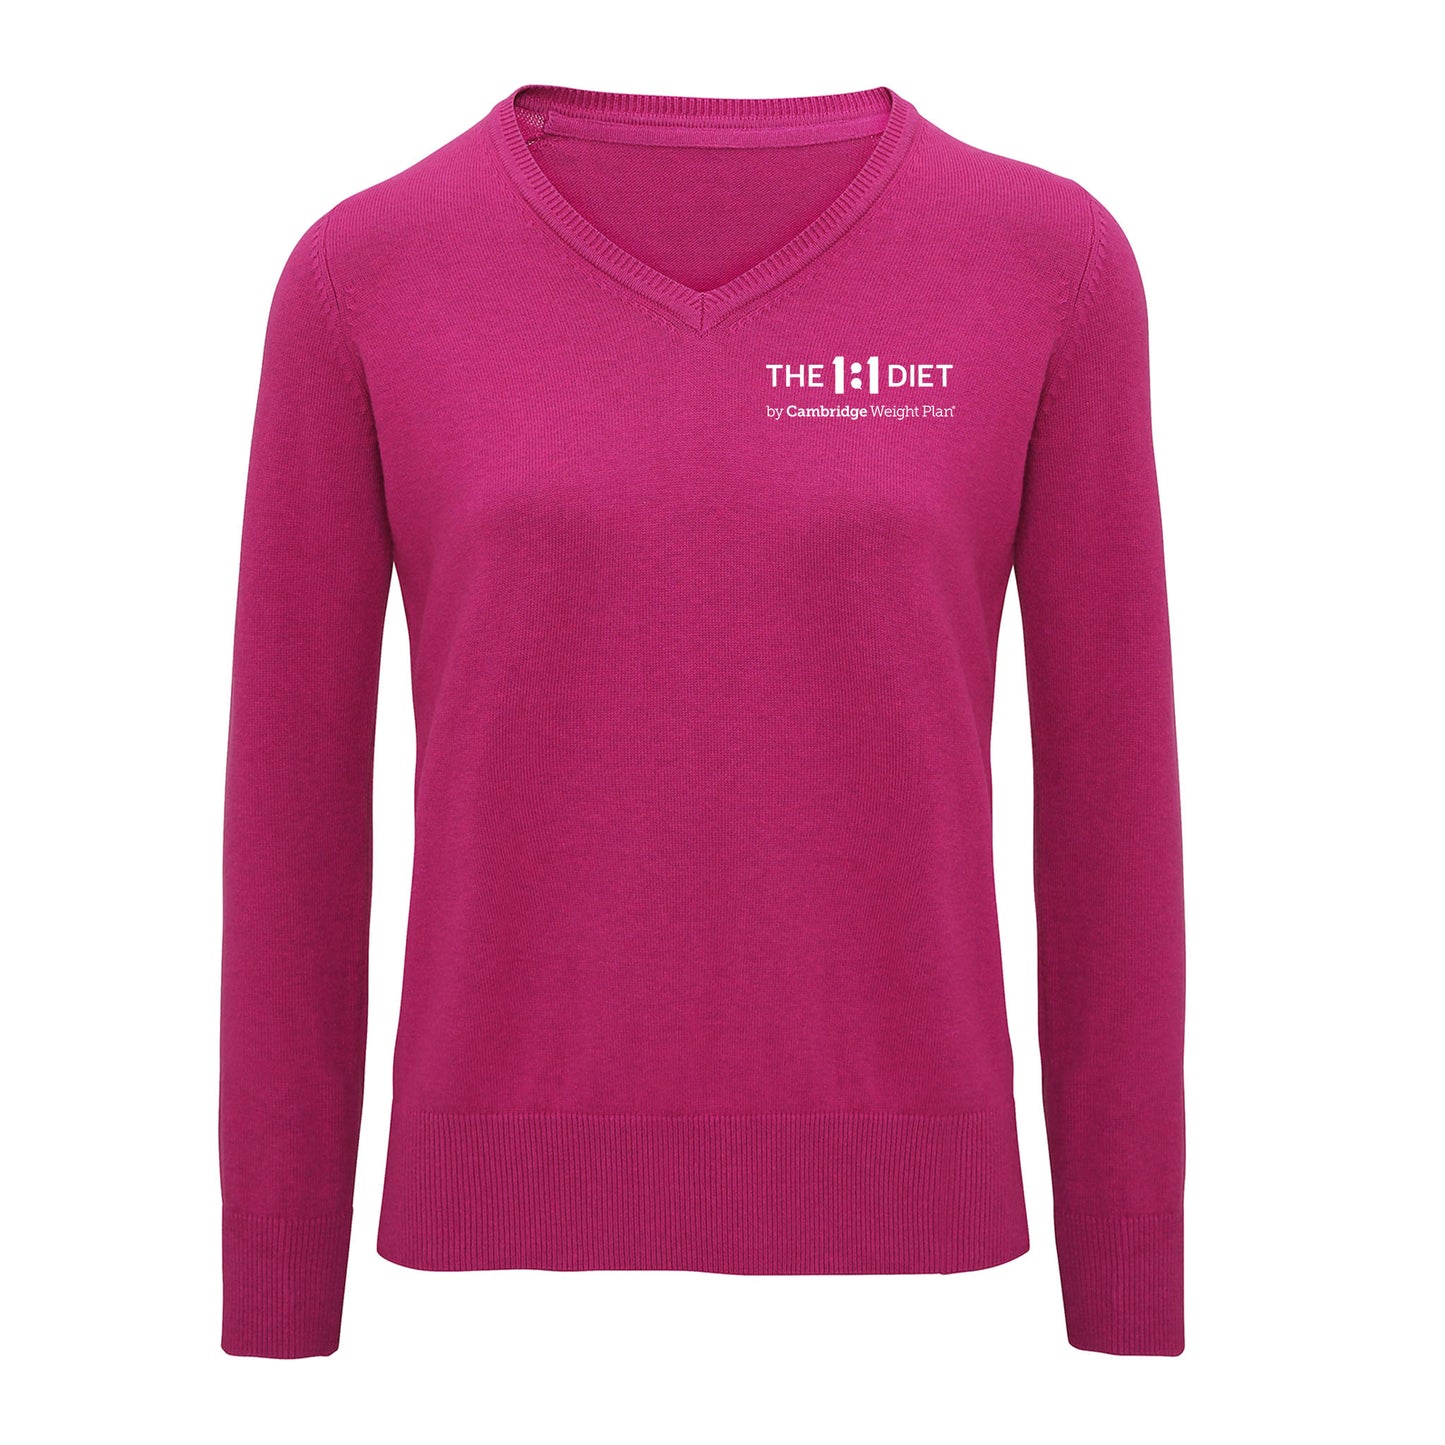 The 1:1 Diet - CLEARANCE - Ladies Cotton Blend V-neck Sweater